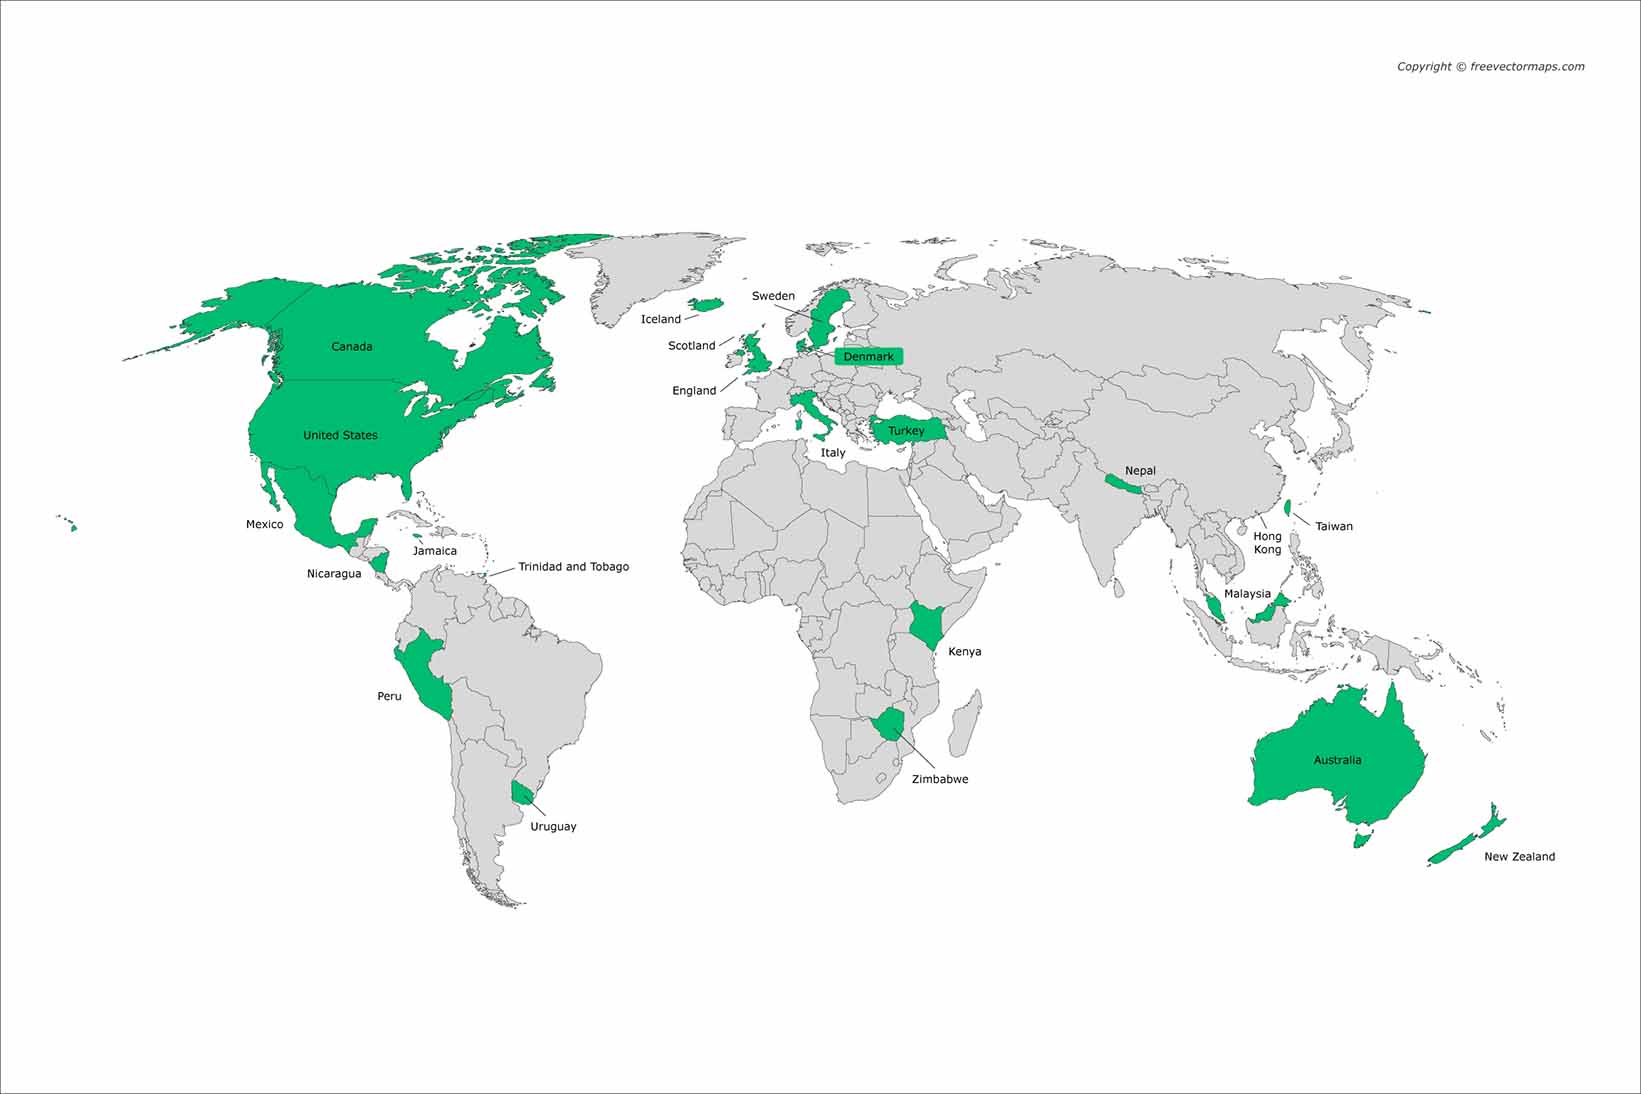 World Map of highlighted countries where we treated R-CPD patients.